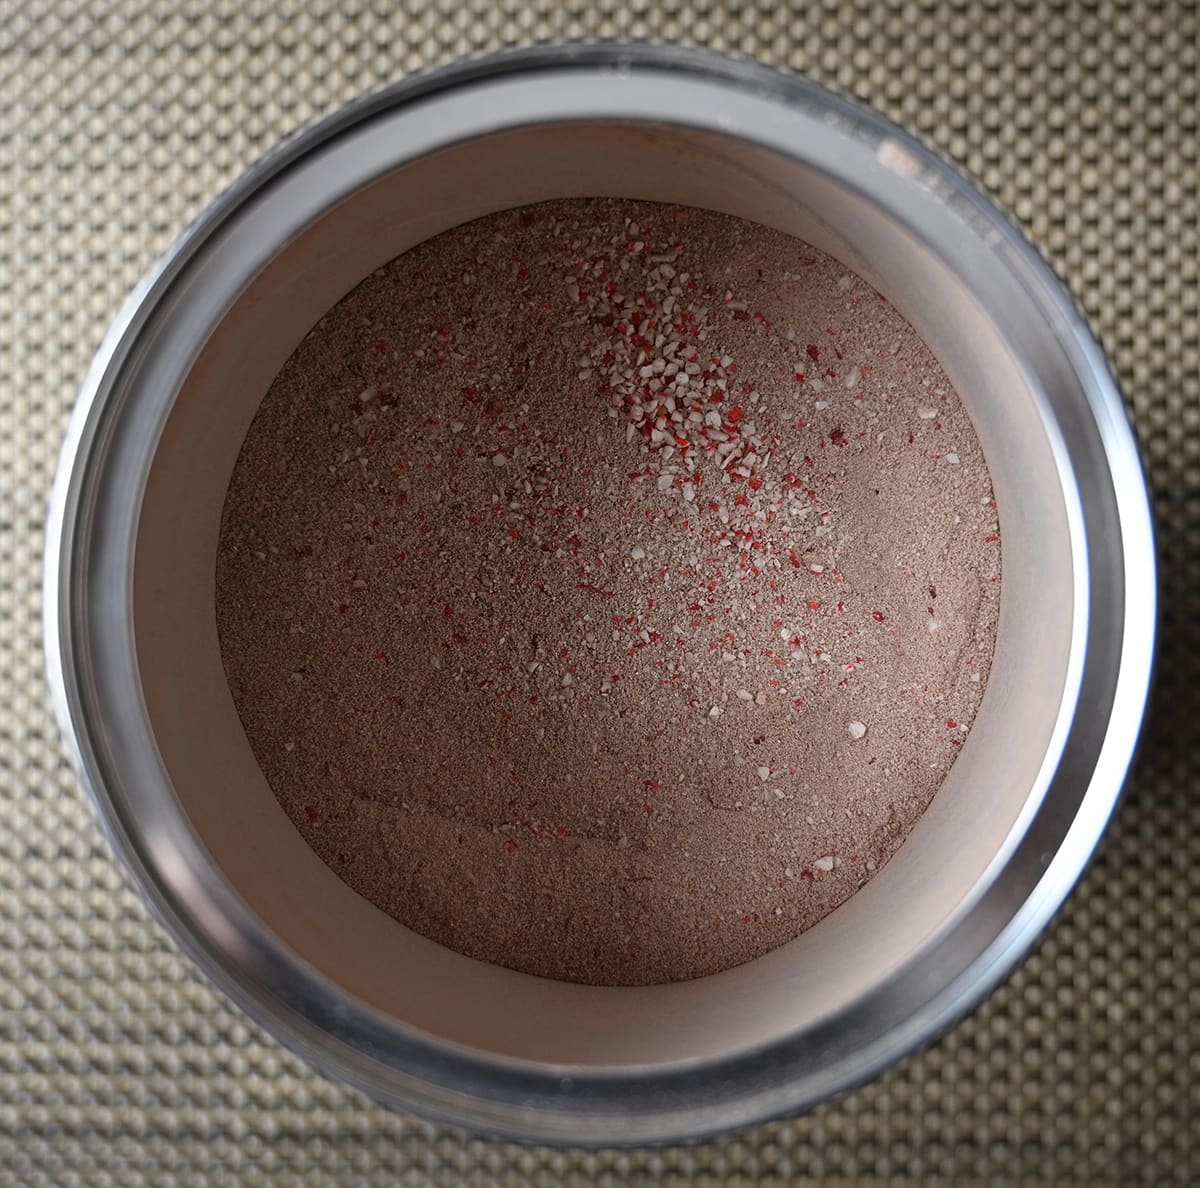 Top down closeup image of the candycane mix container opened so you can see the powder.